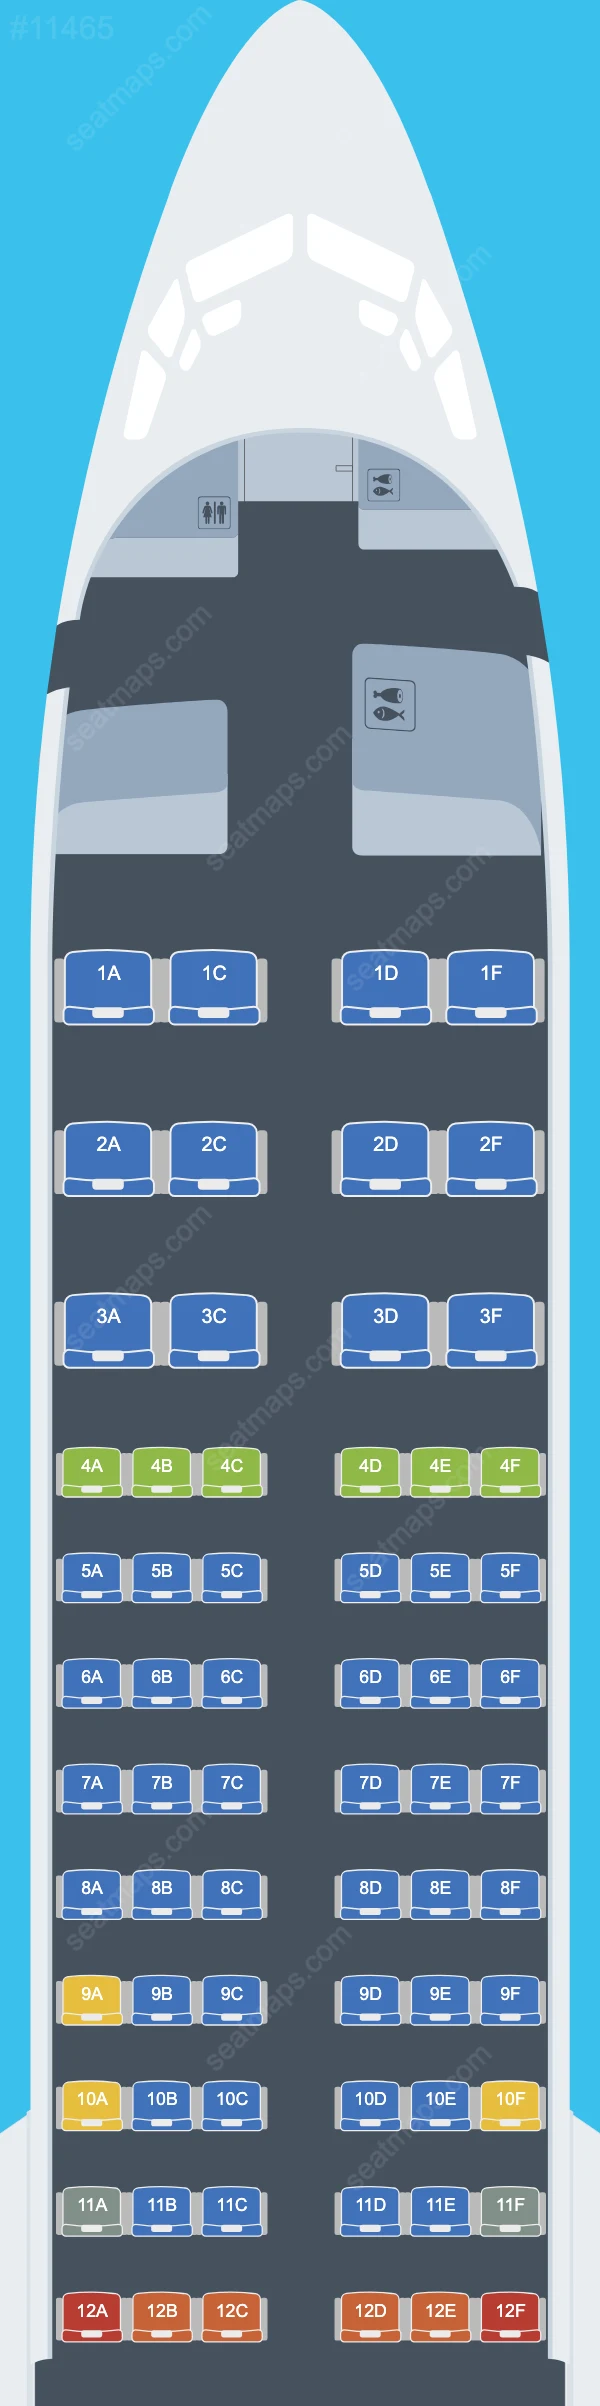 Malaysia Airlines Boeing 737 MAX 8 aircraft seat map  737 MAX 8